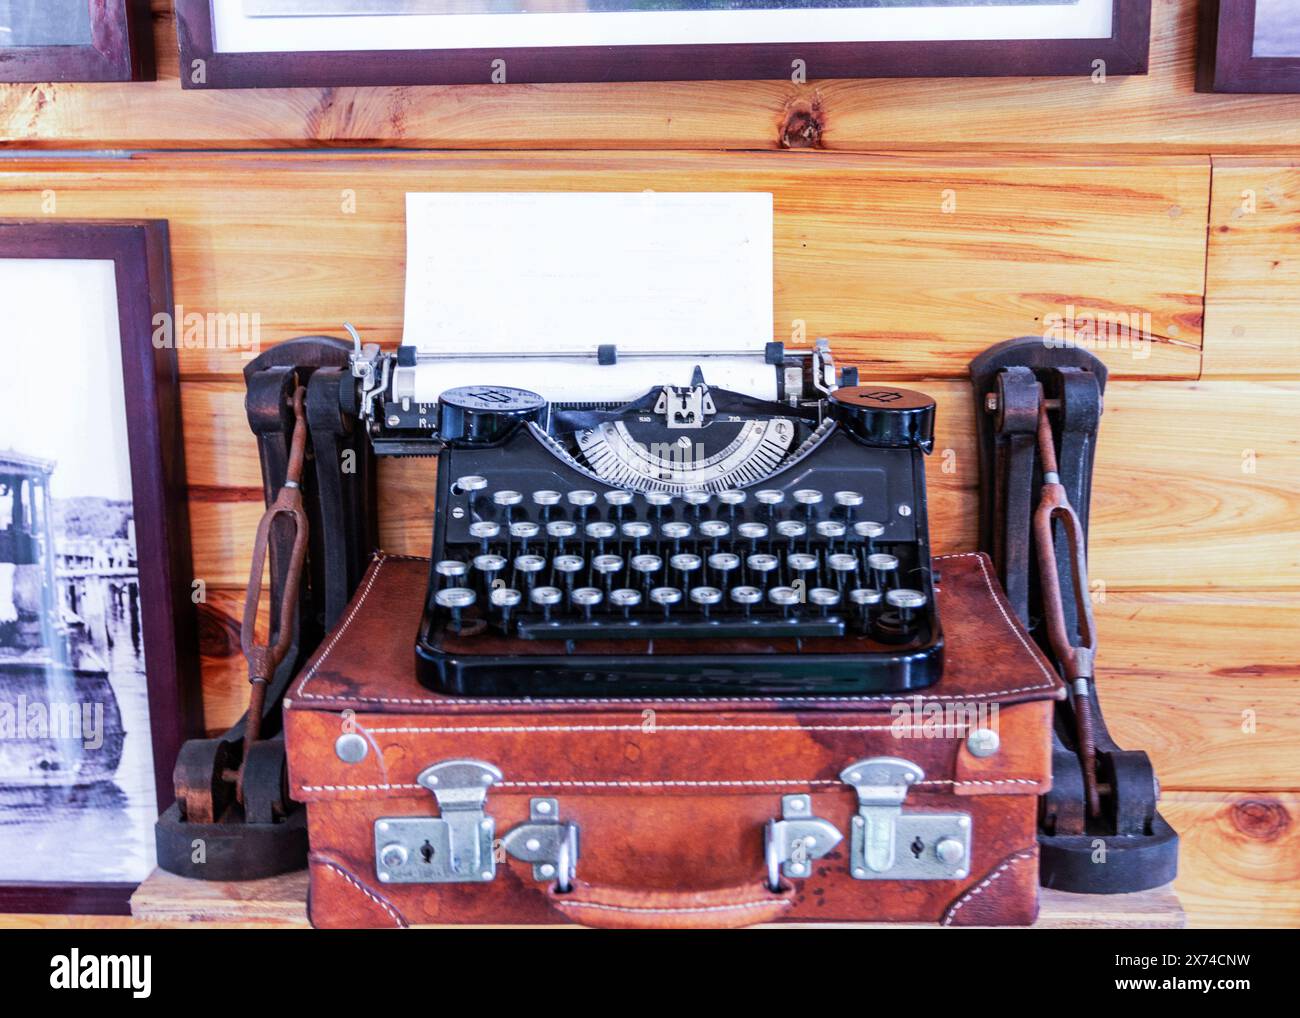 An old-fashioned typewriter is placed on top of a vintage suitcase, creating a nostalgic scene. The typewriters keys and the worn leather of the suitc Stock Photo